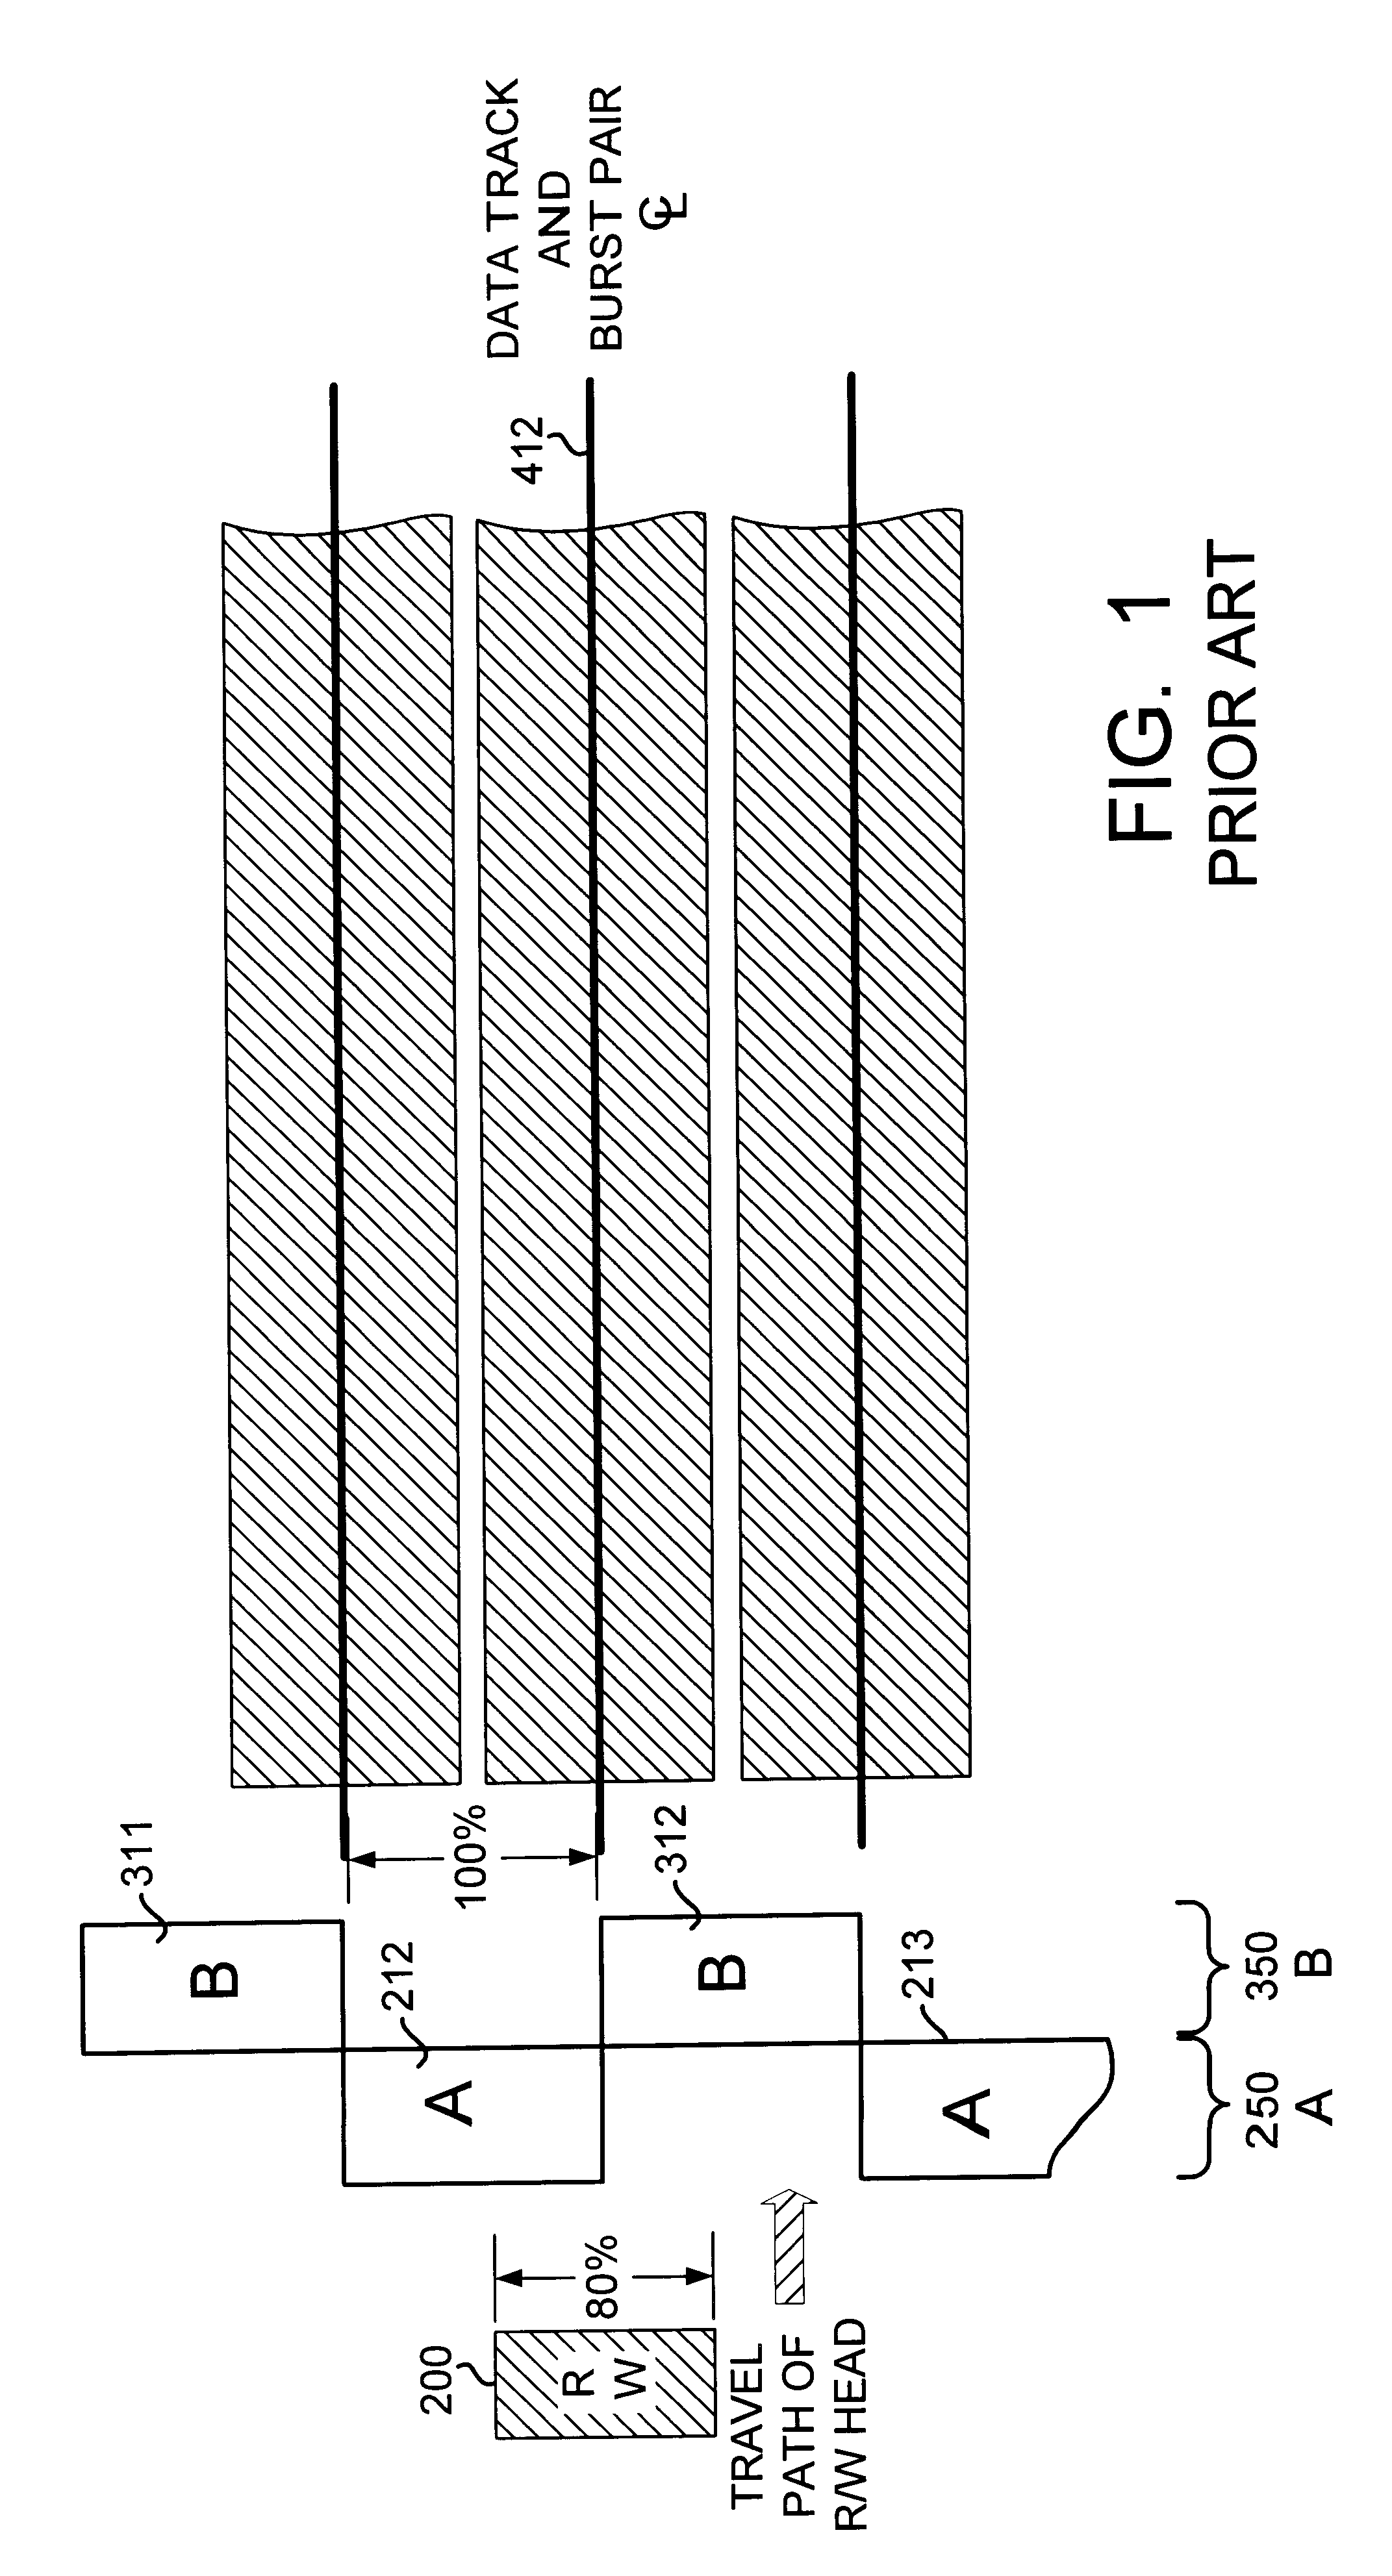 Disk drive with servo burst phasing for improved linearity and off-track performance with a wide reading transducer